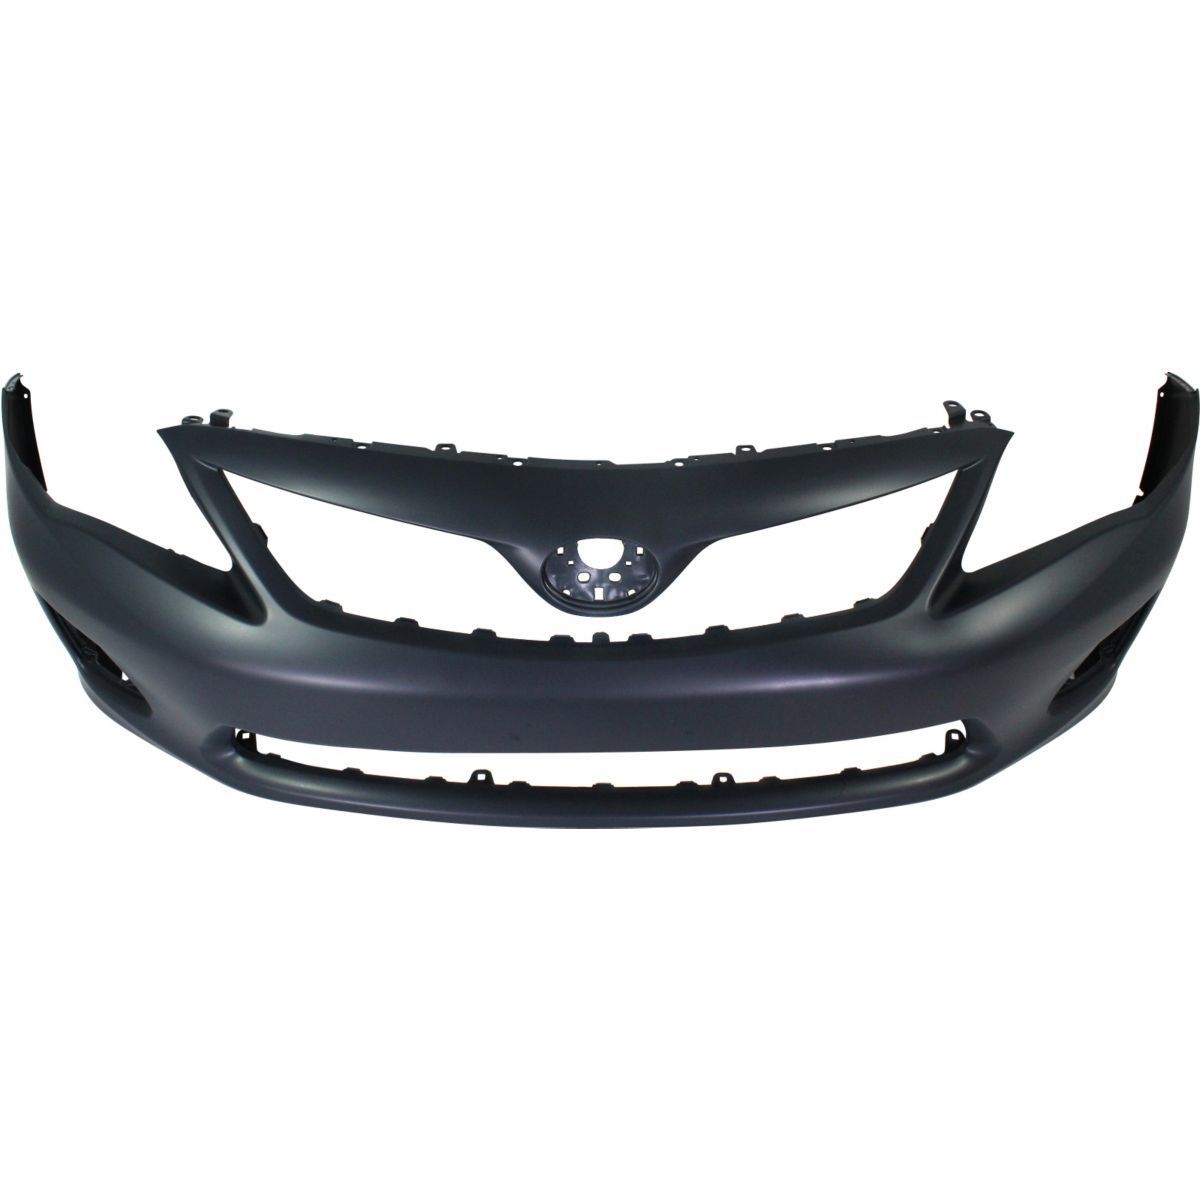 Toyota Corolla 2011 - 2013 Front Bumper Cover 11 - 13 TO1000380 Bumper King